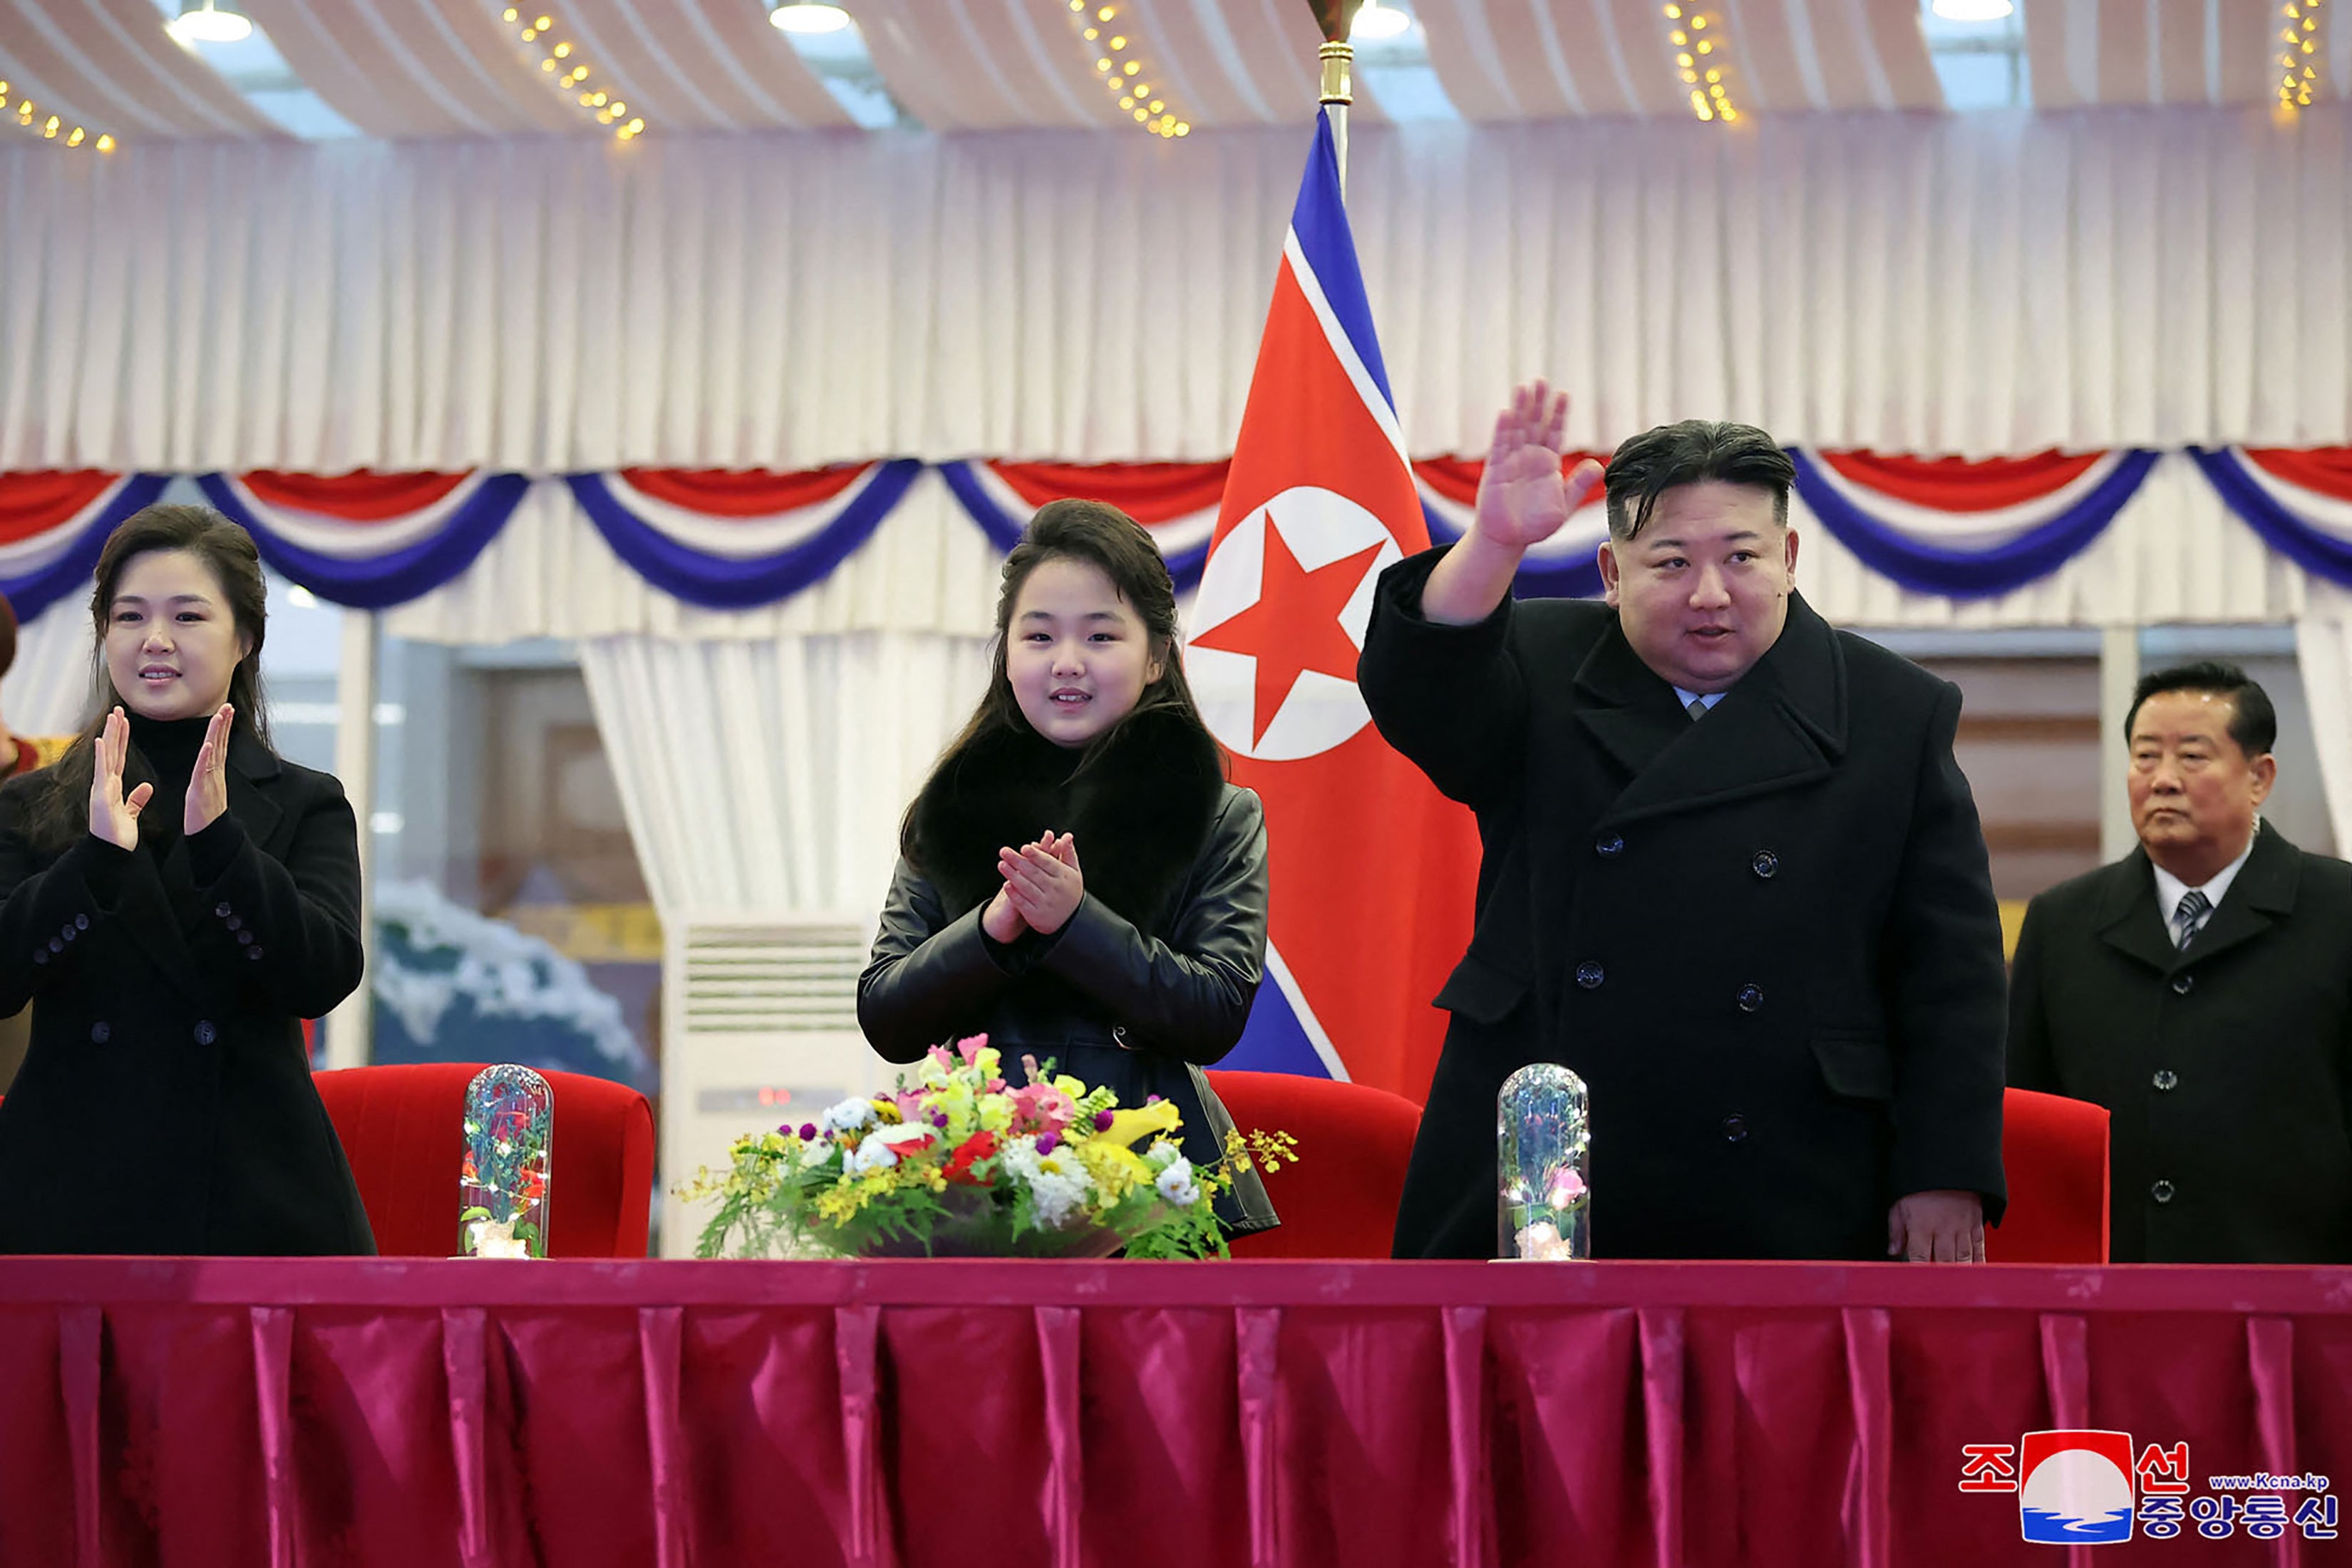 Kim Jong Un and his daughter were also pictured together at New Year